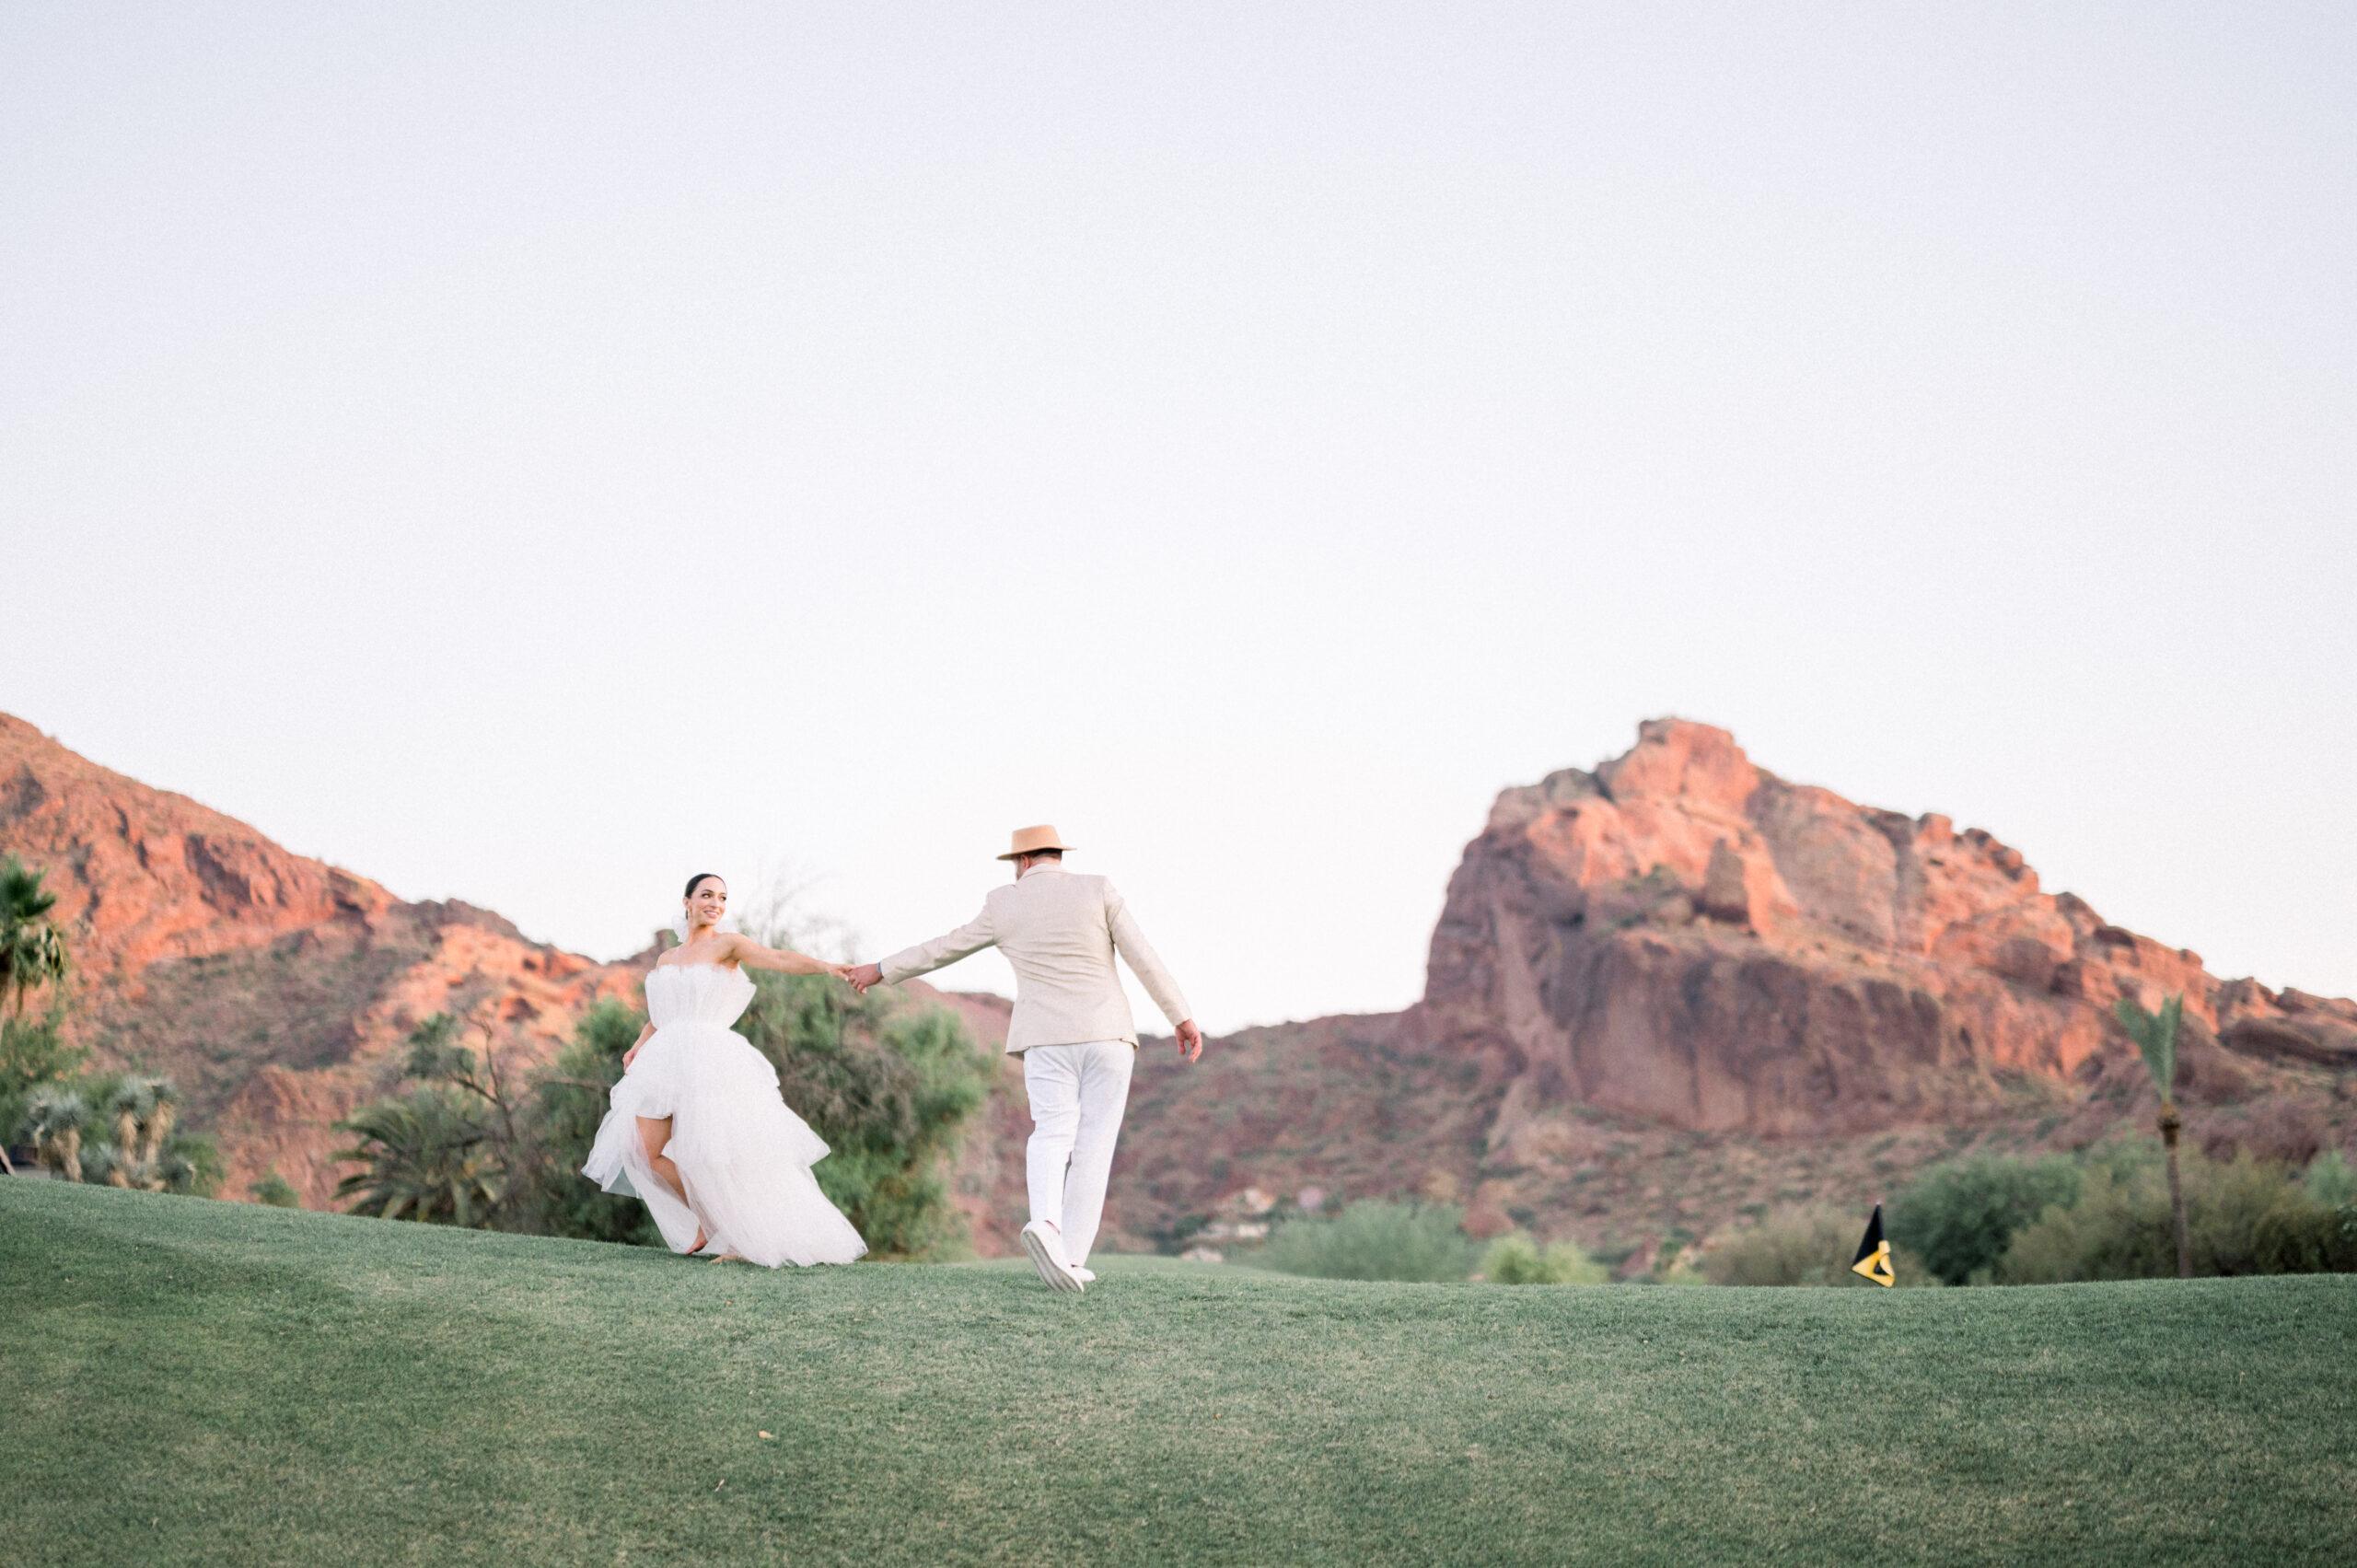 In the heart of Scottsdale is the most stunning wedding venue, where I got to attend the beautiful Mountain Shadows Styled Workshop this summer.